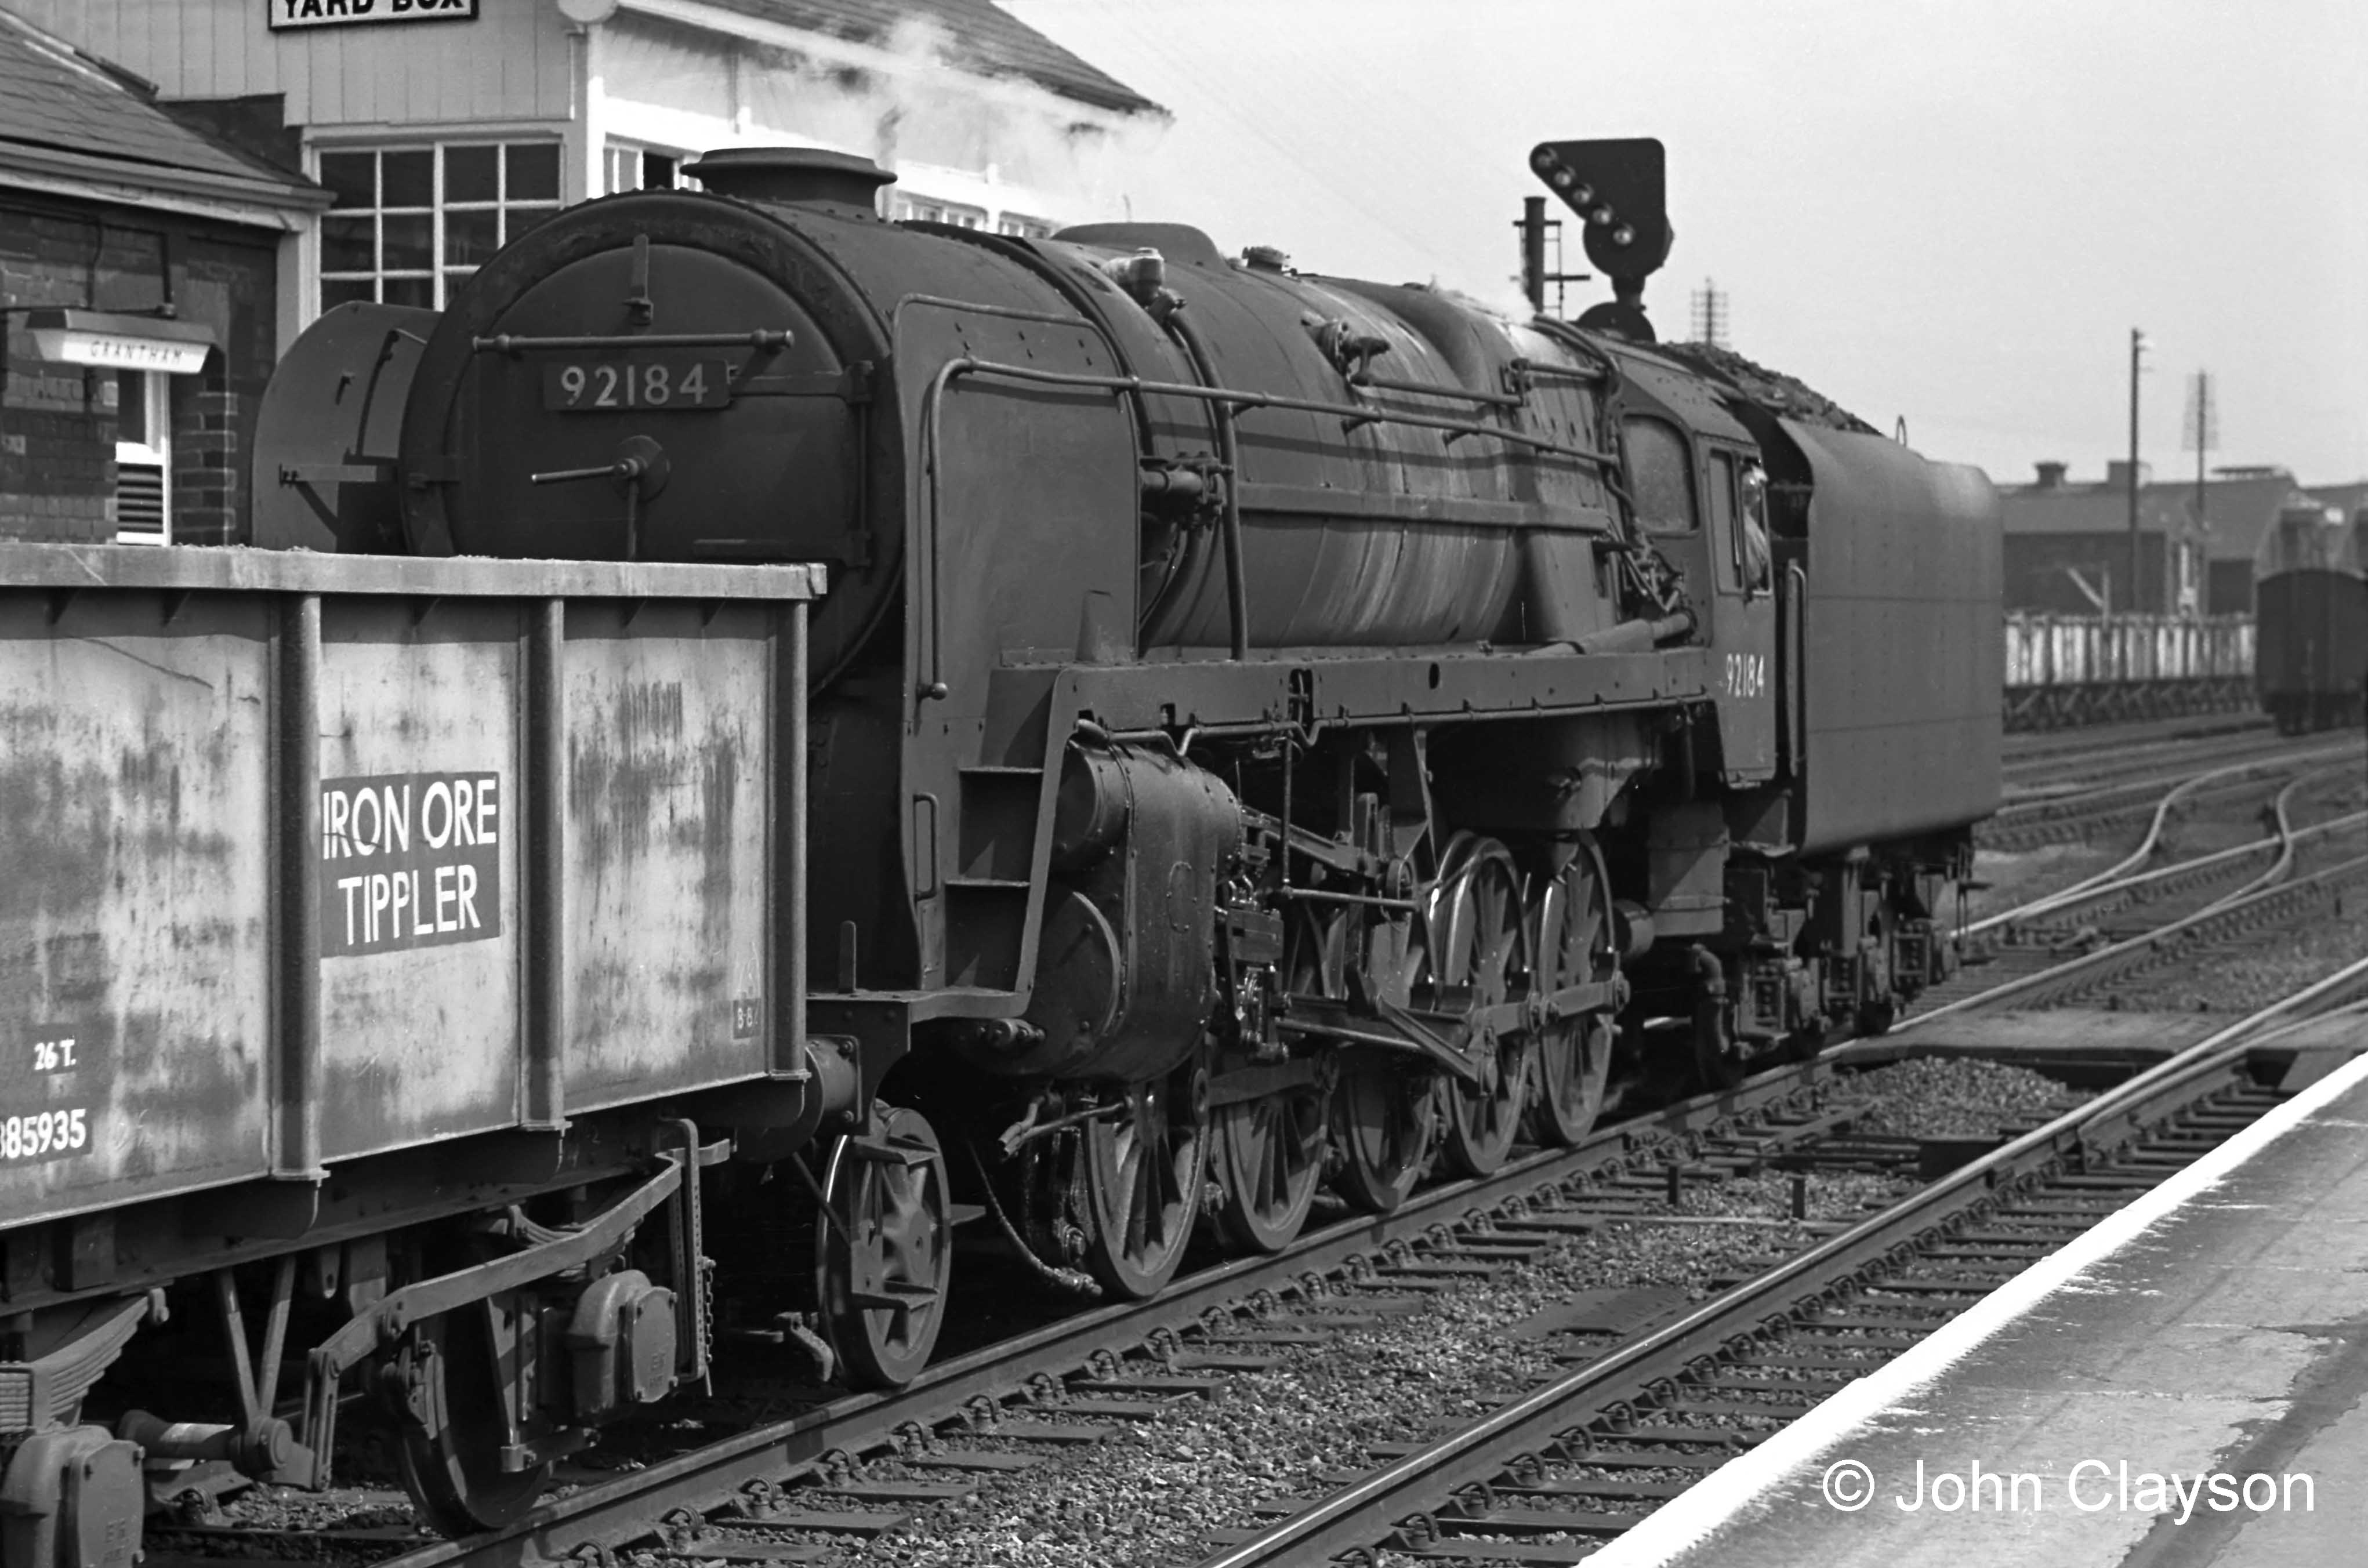 A train of empty ironstone wagons is being taken south through the station on the Up Main line by class 9F locomotive No.92184 on 27th June 1963. Projecting above the level of the cab is an inclined row of illuminated white lights attached to the colour light signal. This shows that the train is signalled to take the connection into the Up Goods line at the points just beyond its tender. It will use the Goods line, alongside the Up Main line, from here as far as High Dyke, where it will be crossed over to the Down side to enter the reception sidings for the Stainby Branch. The Goods line kept slower trains, such as this one, out of the path of the expresses, especially important because the route climbs continually from here to Stoke Tunnel (just beyond High Dyke), slowing mineral trains even more. The term ‘Iron Ore Tippler’ indicates that the wagons have no doors – they were emptied by being tipped upside down in unloading plant at the steelworks. Photograph by Cedric A. Clayson.